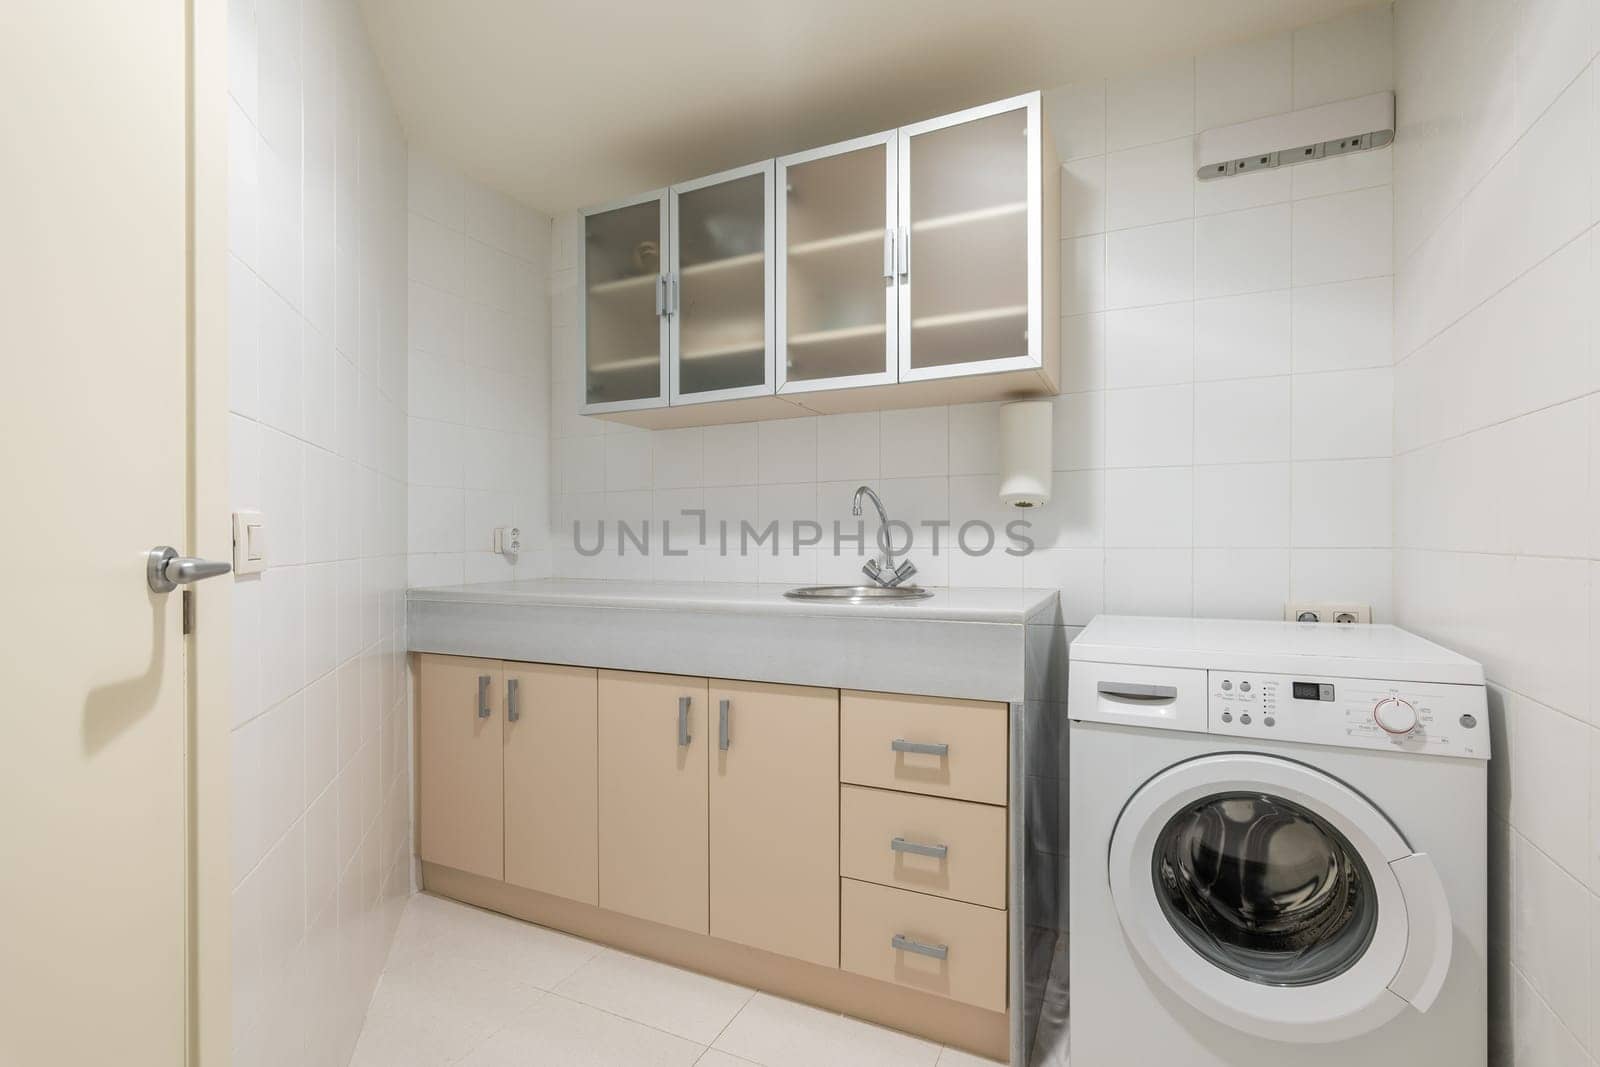 Small laundry room with washing machine sink and storage cabinets. Great room designed for laundry separate from bathroom. Designated area